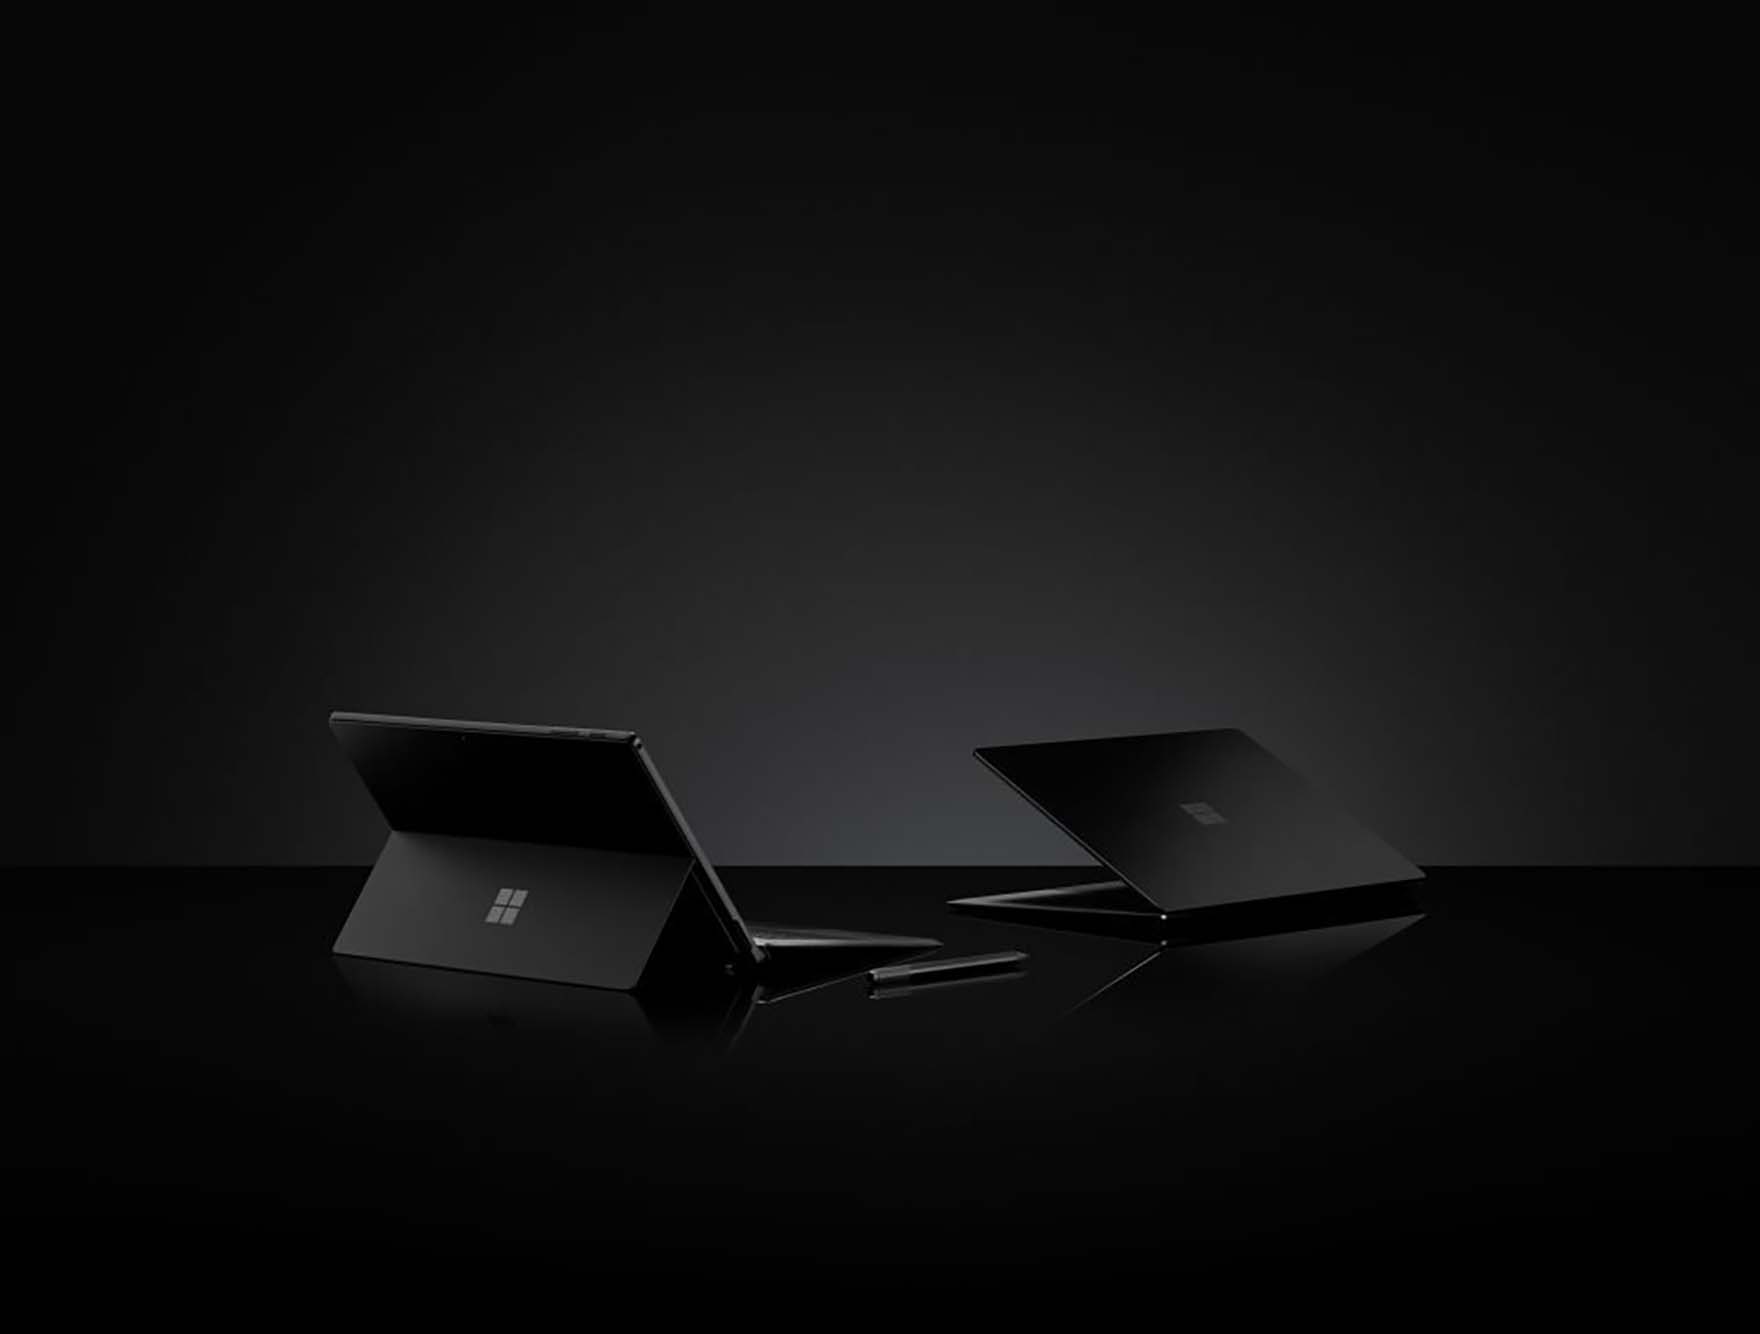 Surface Pro 6 and Surface Laptop 2 available today